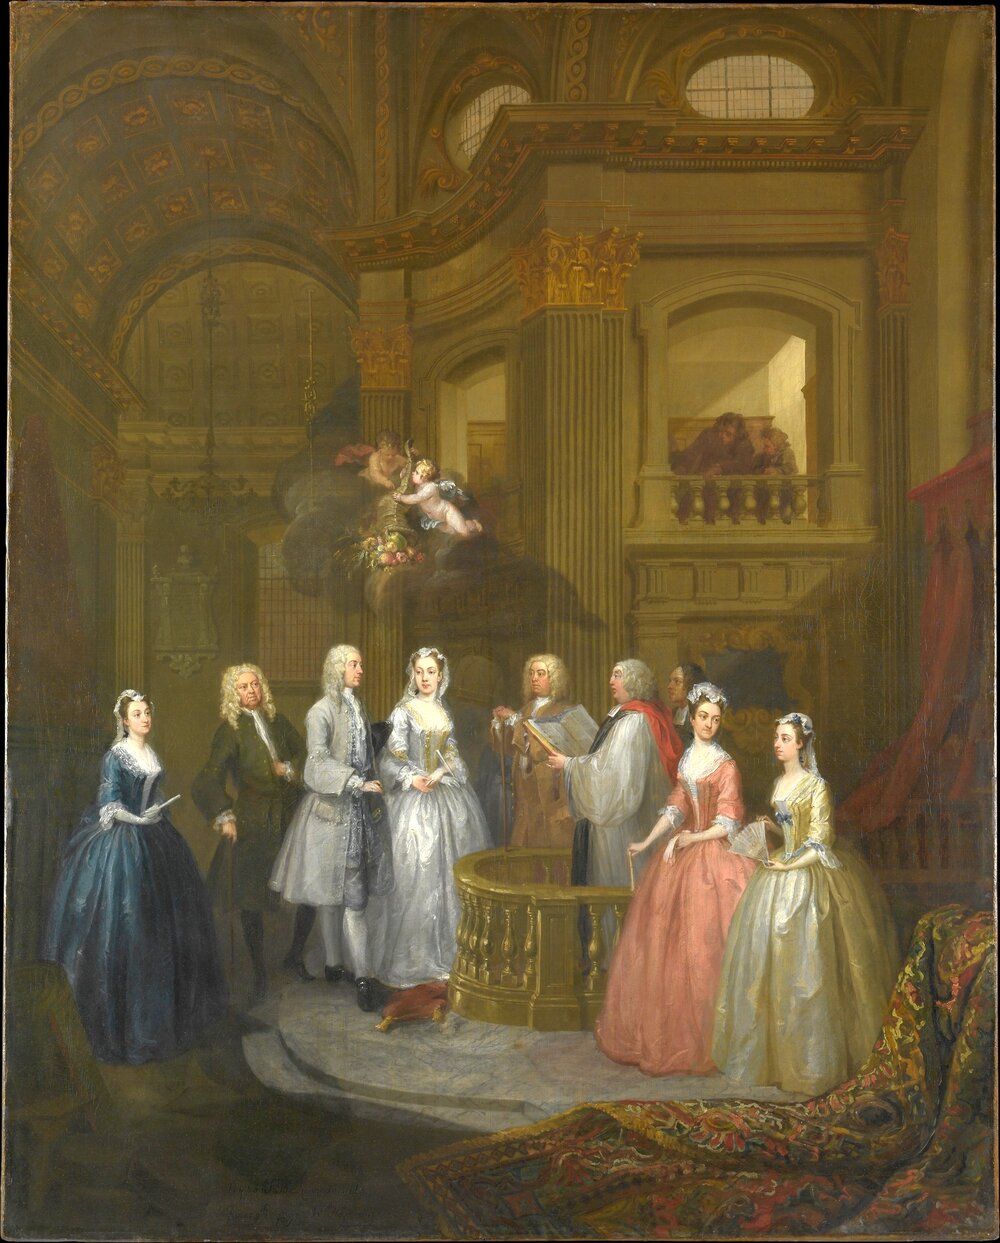 An example of a gentrified wedding by Hogarth, 1729